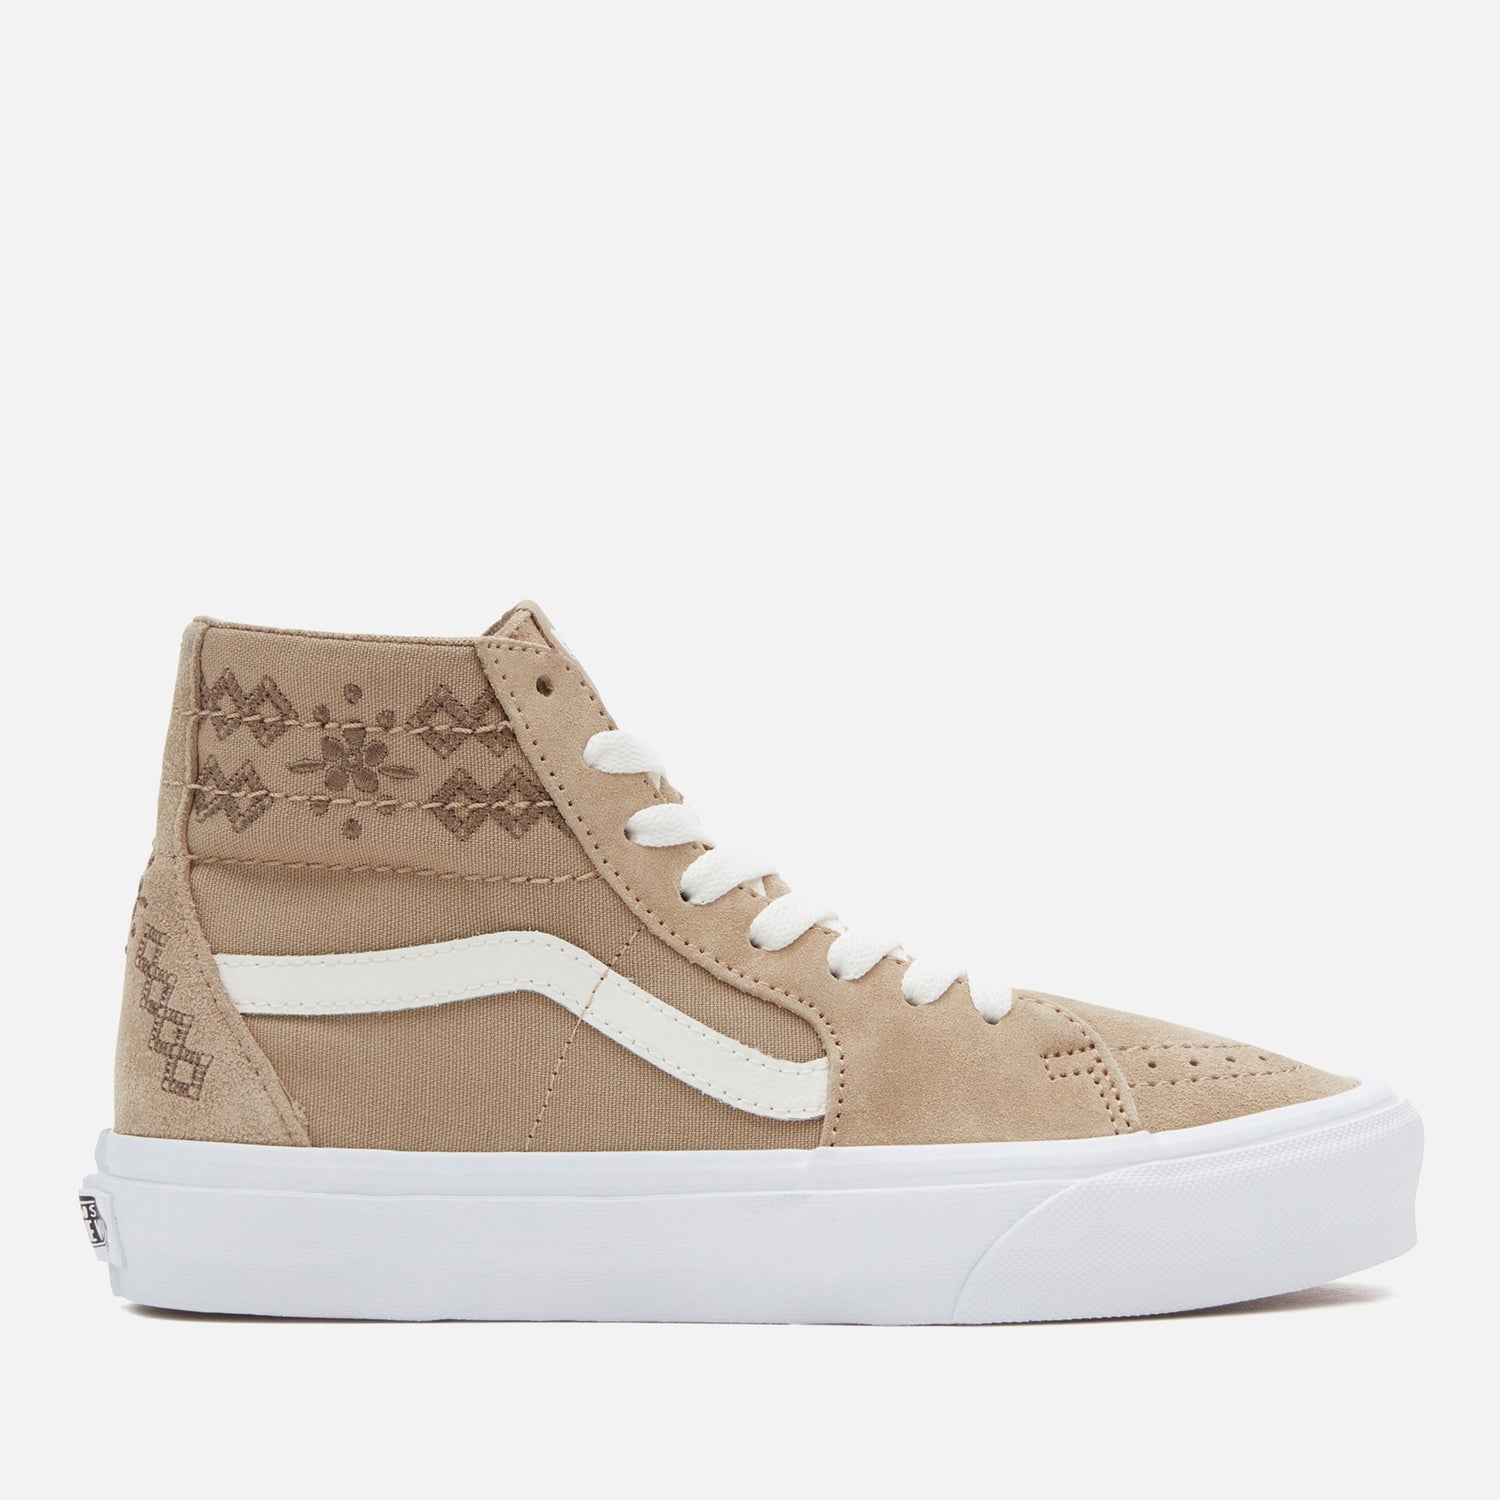 Vans Women's SK8-Hi Tapered Canvas and Suede Trainers - UK 4